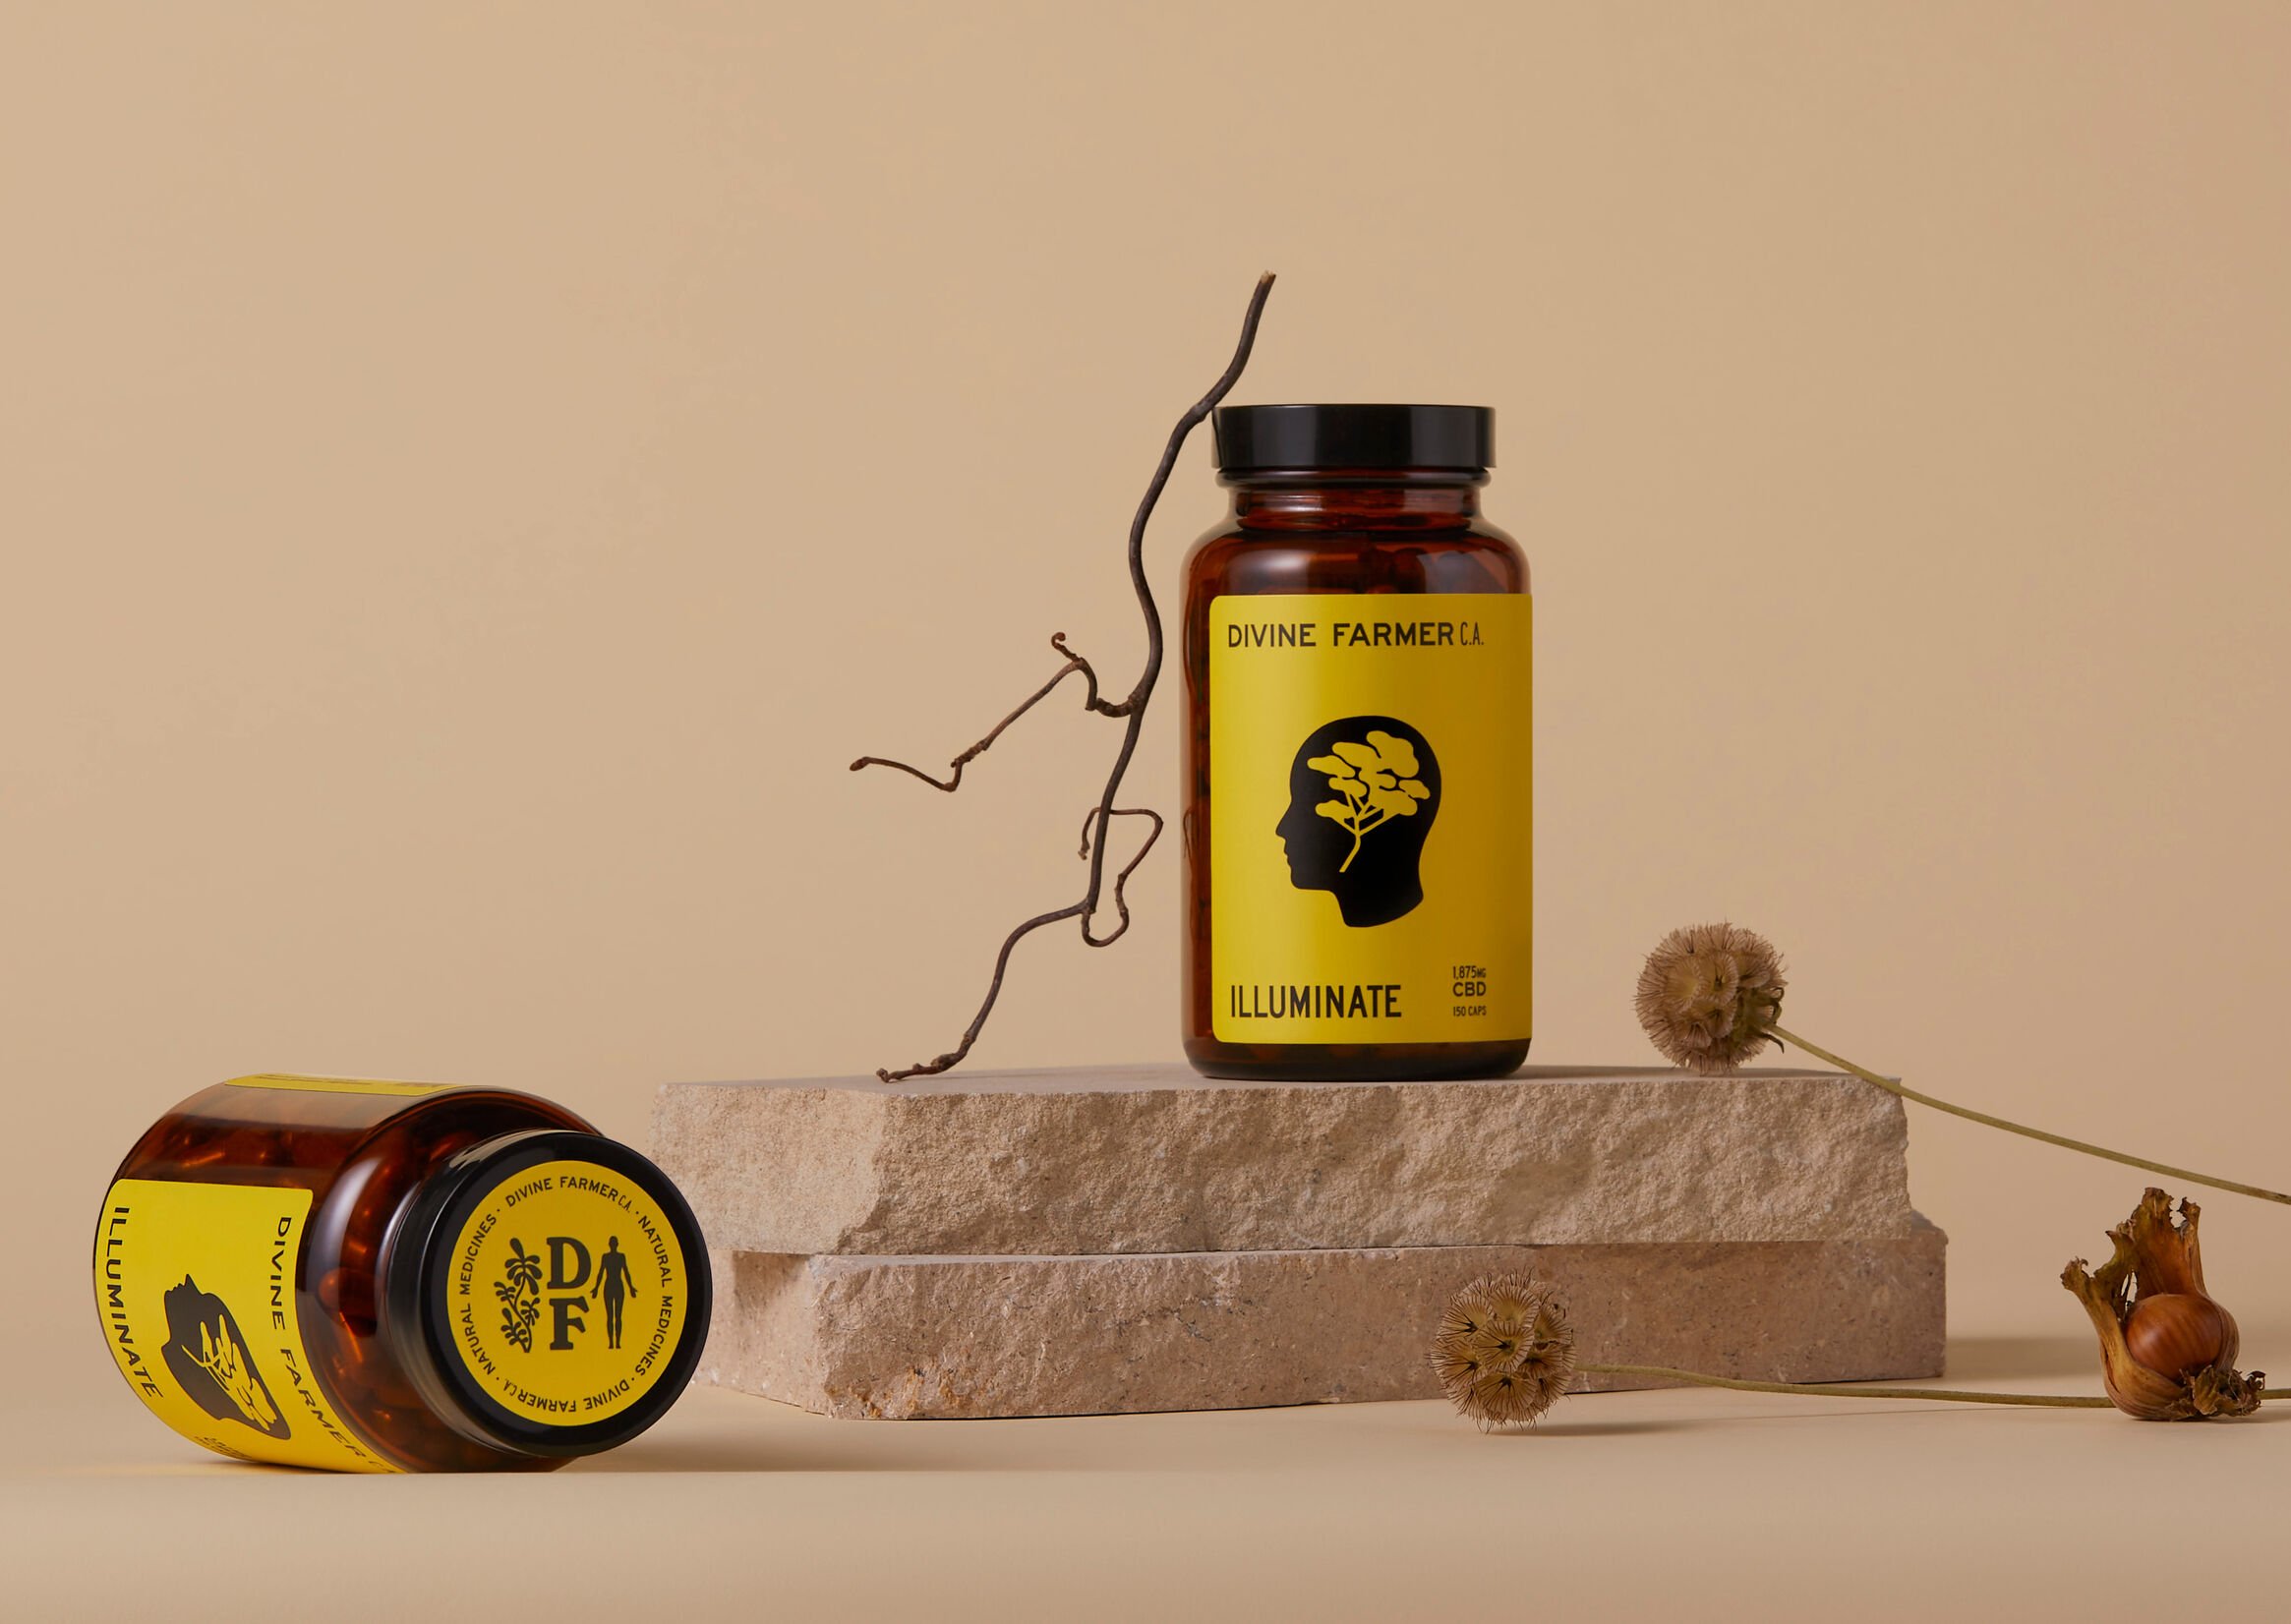 Packaging and labelling for nano CBD wellness business Divine Farmer developed by Base Design